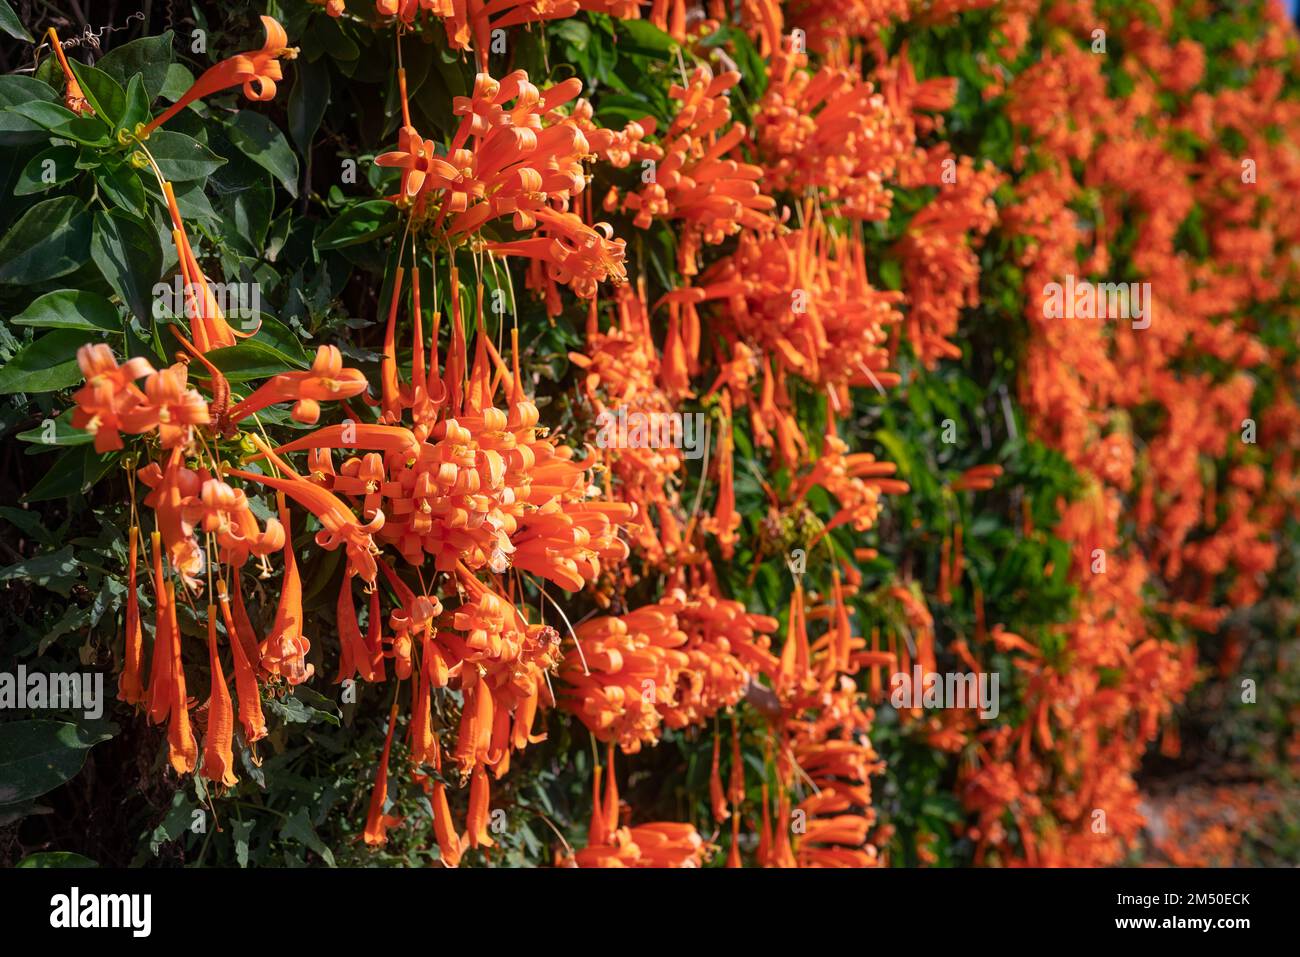 Flamevine orange flowers wall closeup. Green leaves and bright blossoms Stock Photo